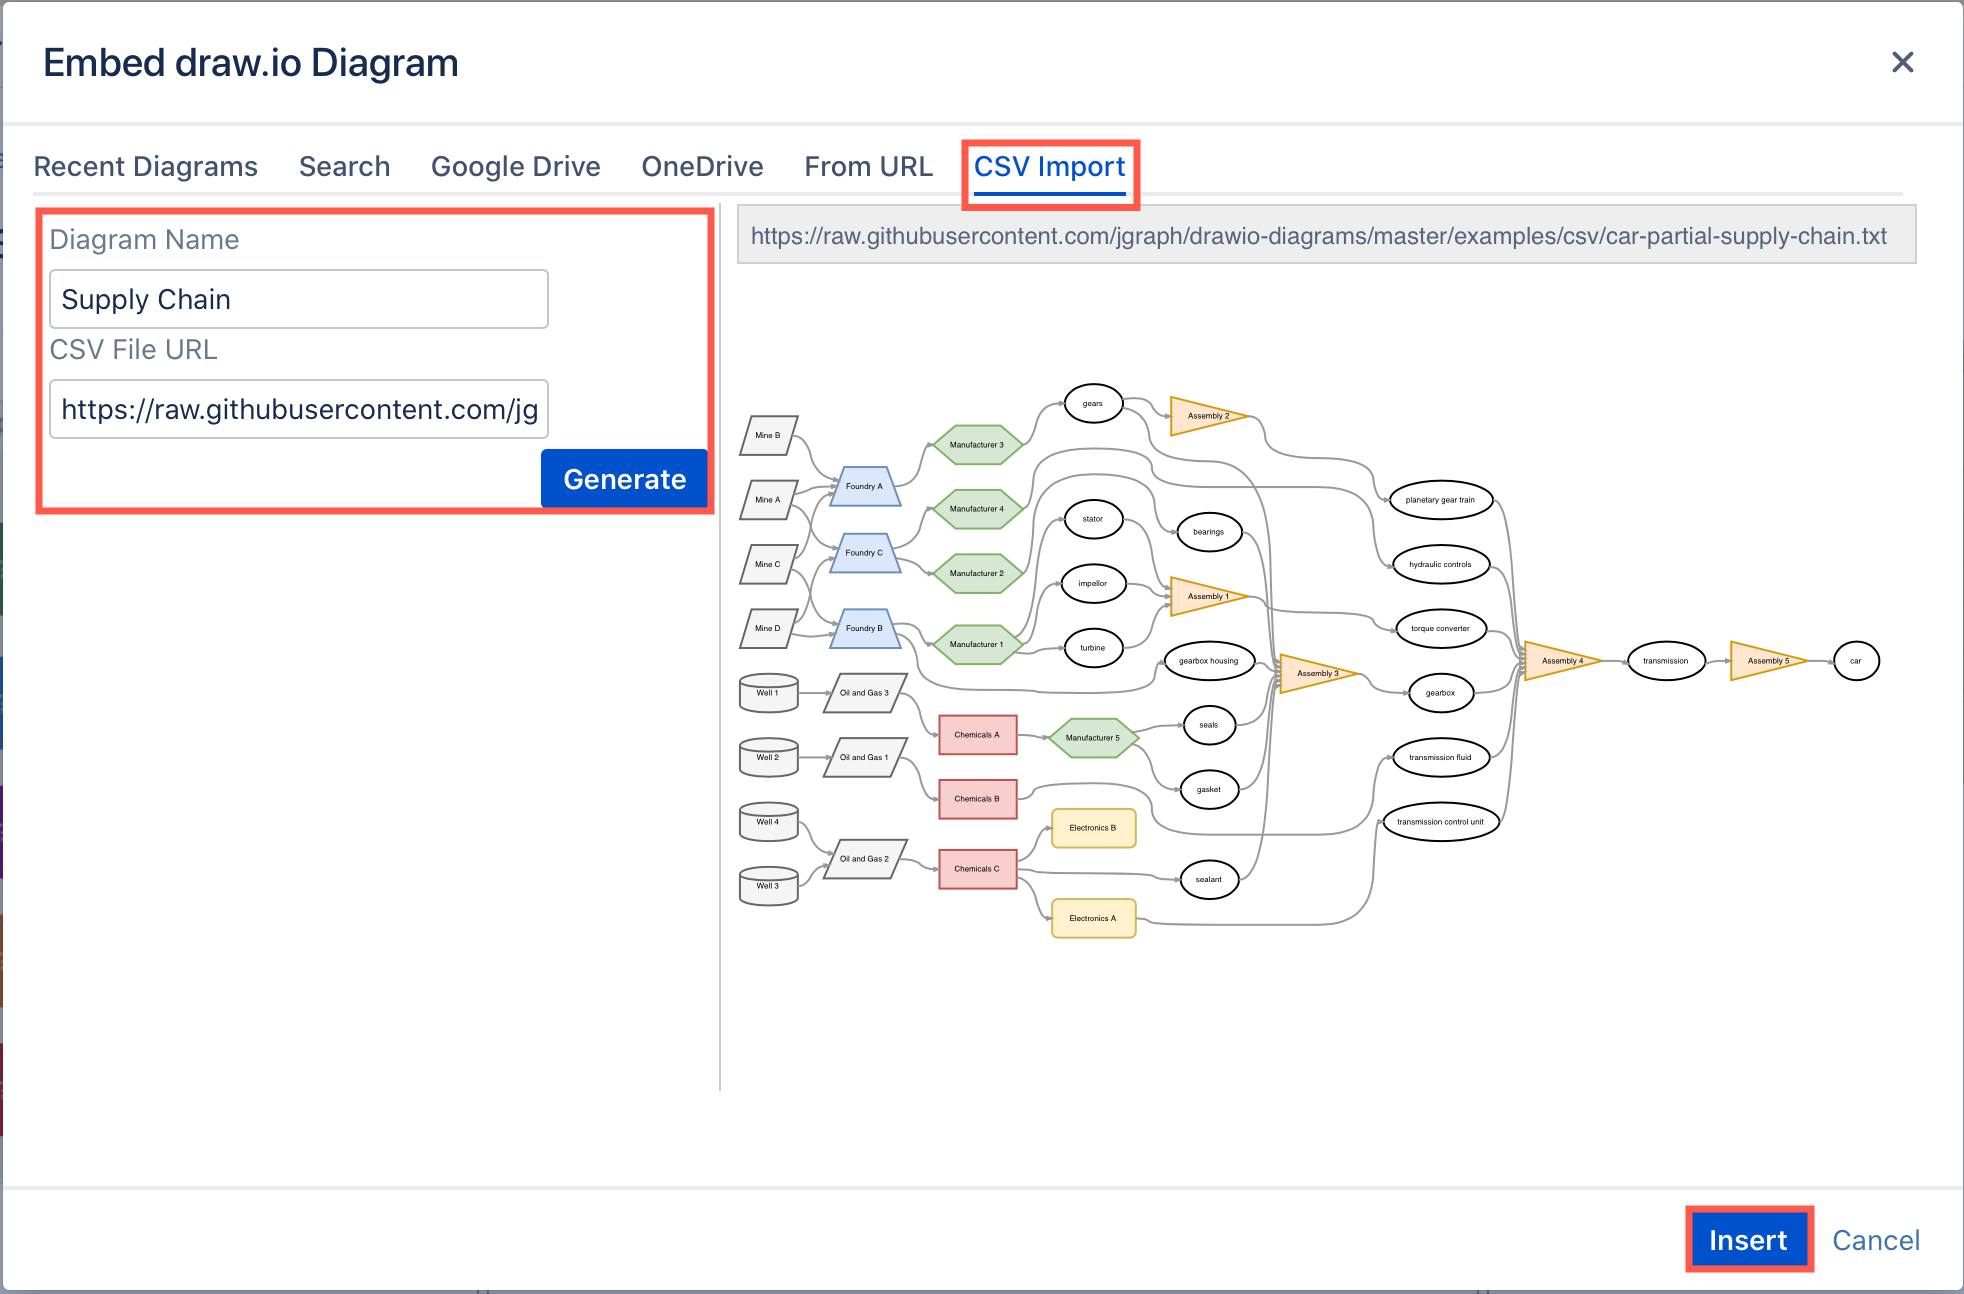 Import a CSV file from a URL and embed it as a draw.io diagram in Confluence